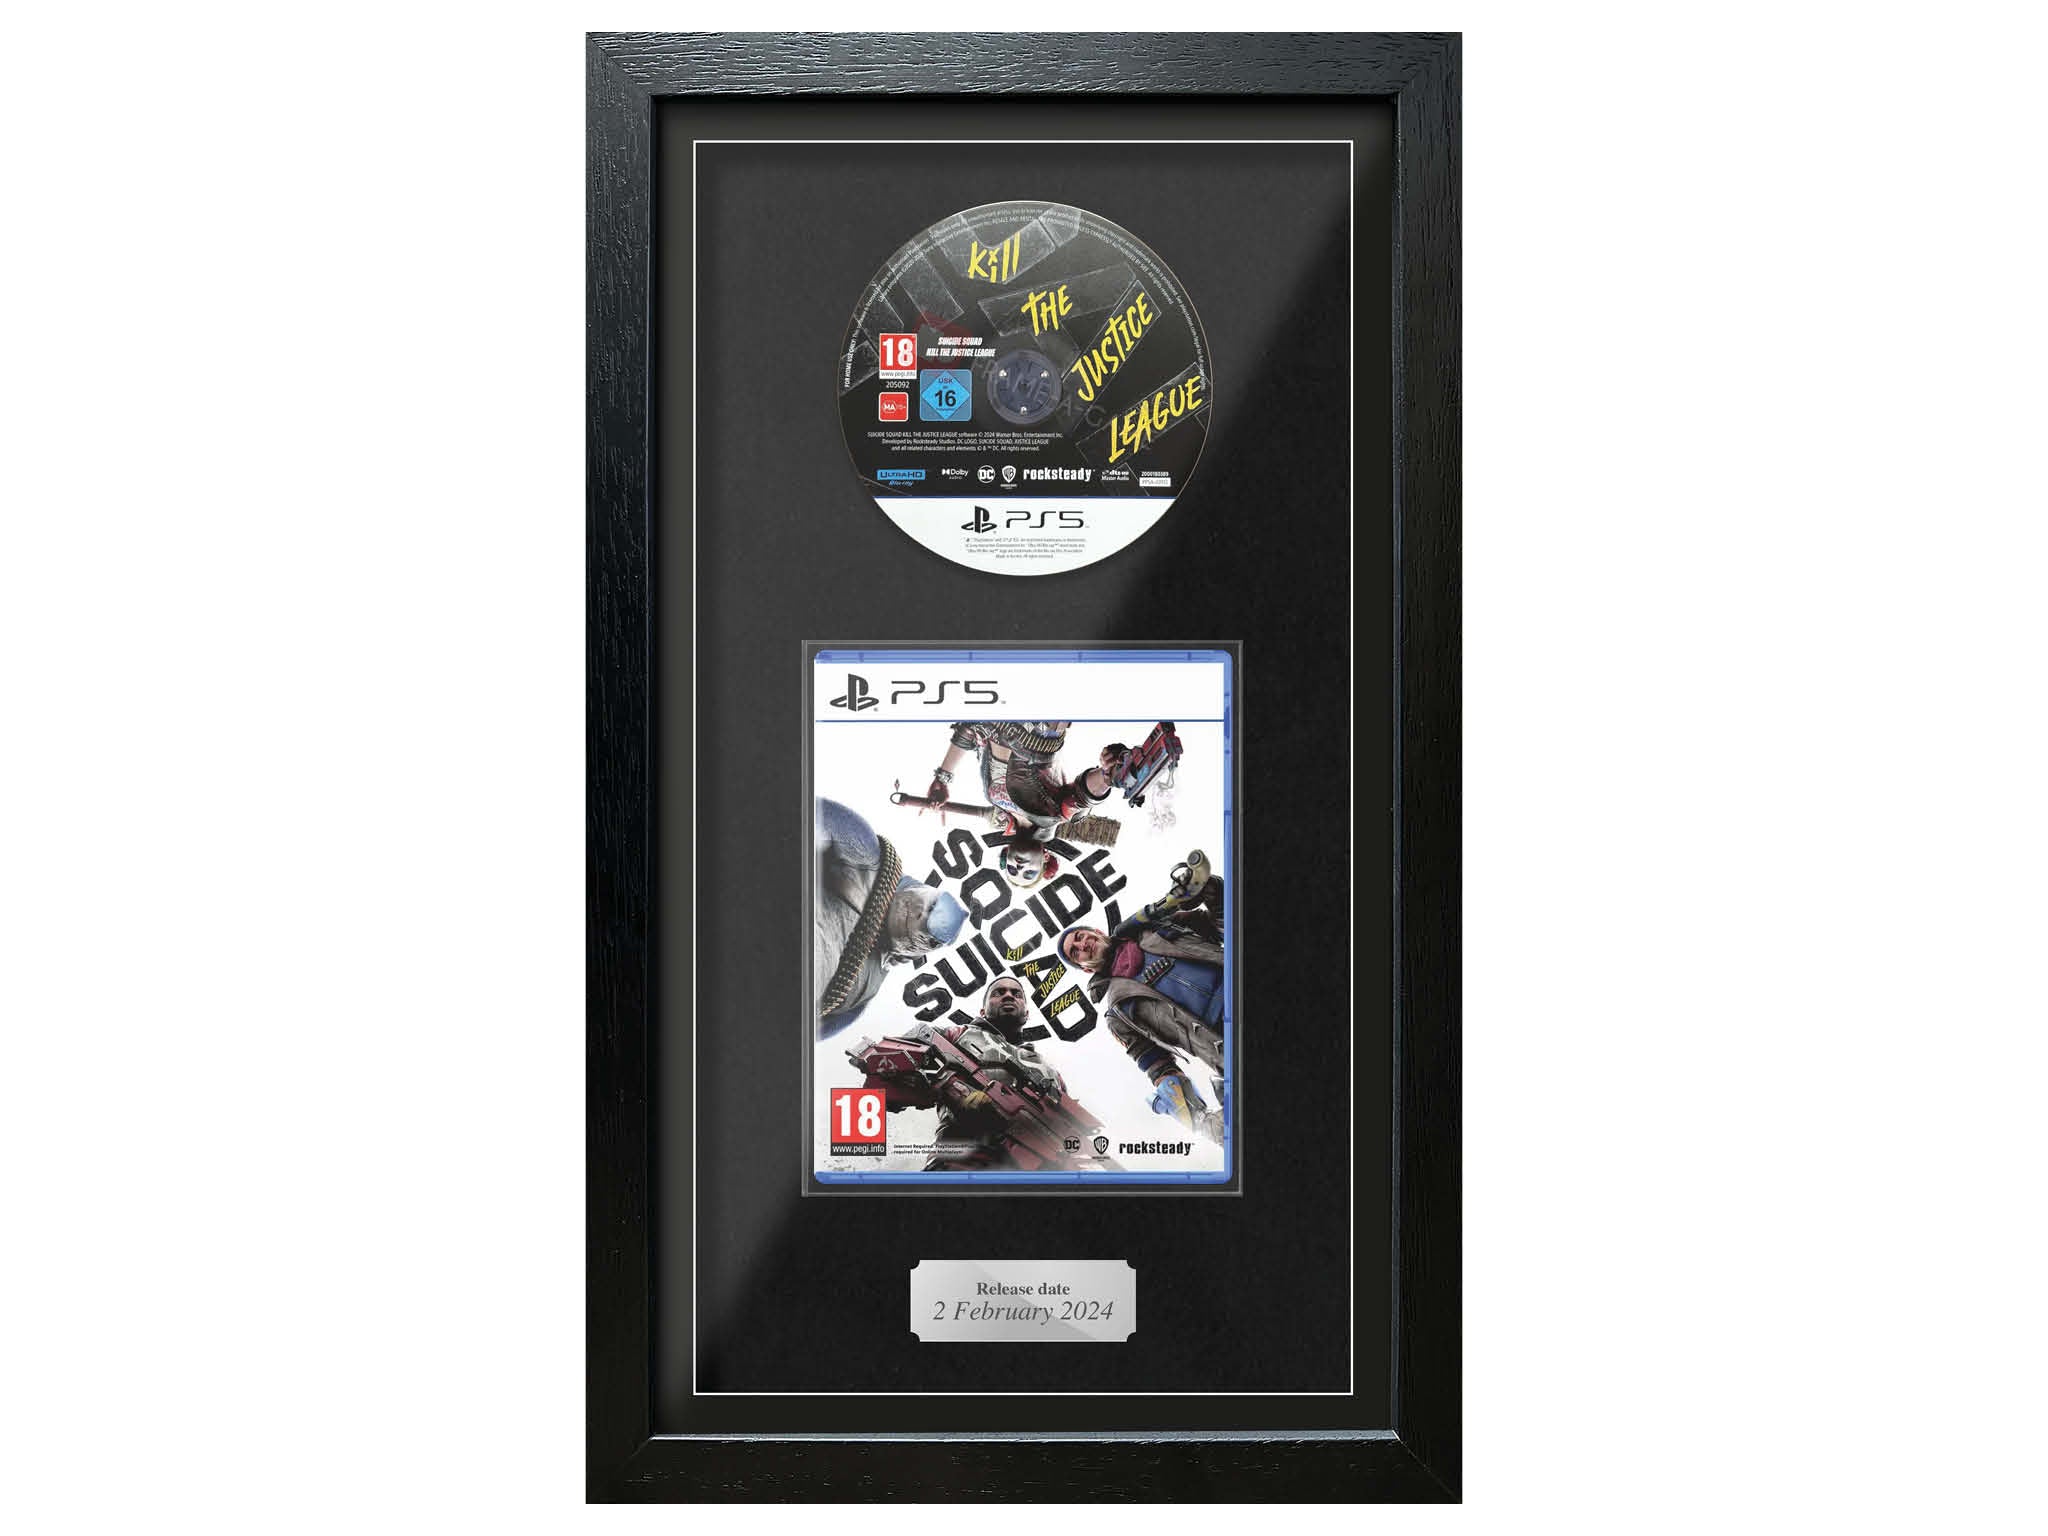 Suicide Squad: Kill the Justice League (Exhibition Range) Framed Game - Frame-A-Game